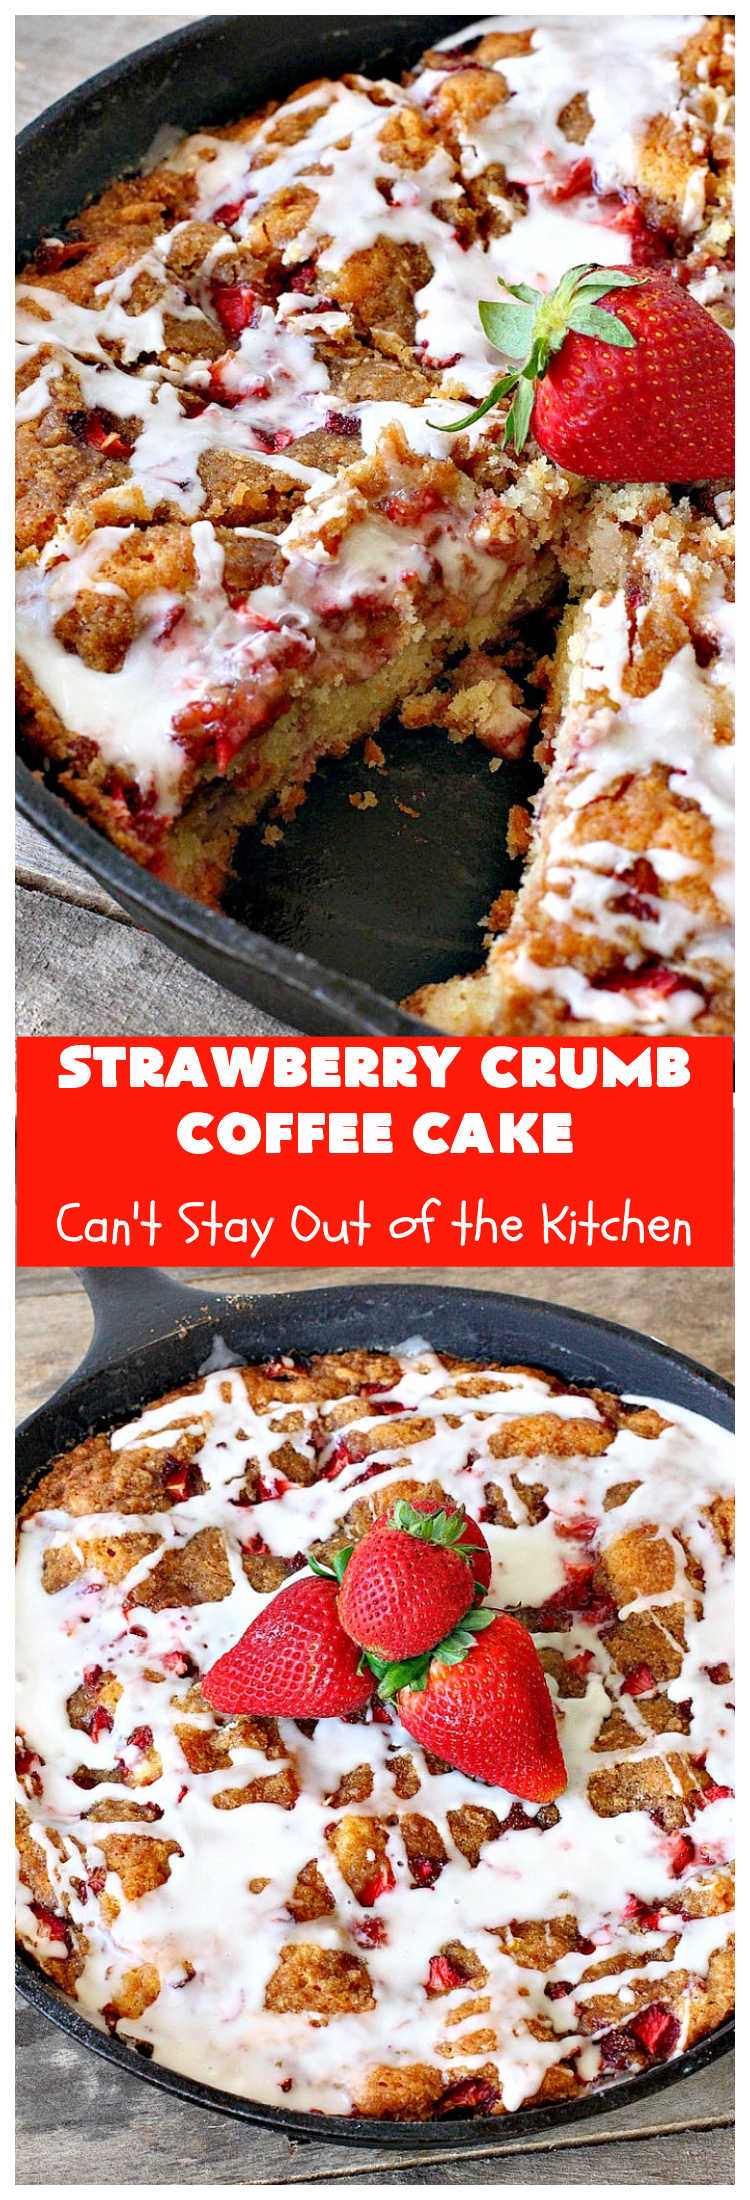 Strawberry Crumb Coffee Cake | Can't Stay Out of the Kitchen | this fantastic #coffeecake can be served for #breakfast or #dessert. It's terrific for company or #holiday meals. It's so scrumptious you'll find yourself drooling over every bite! #cake #strawberries #StrawberryCrumbCoffeeCake